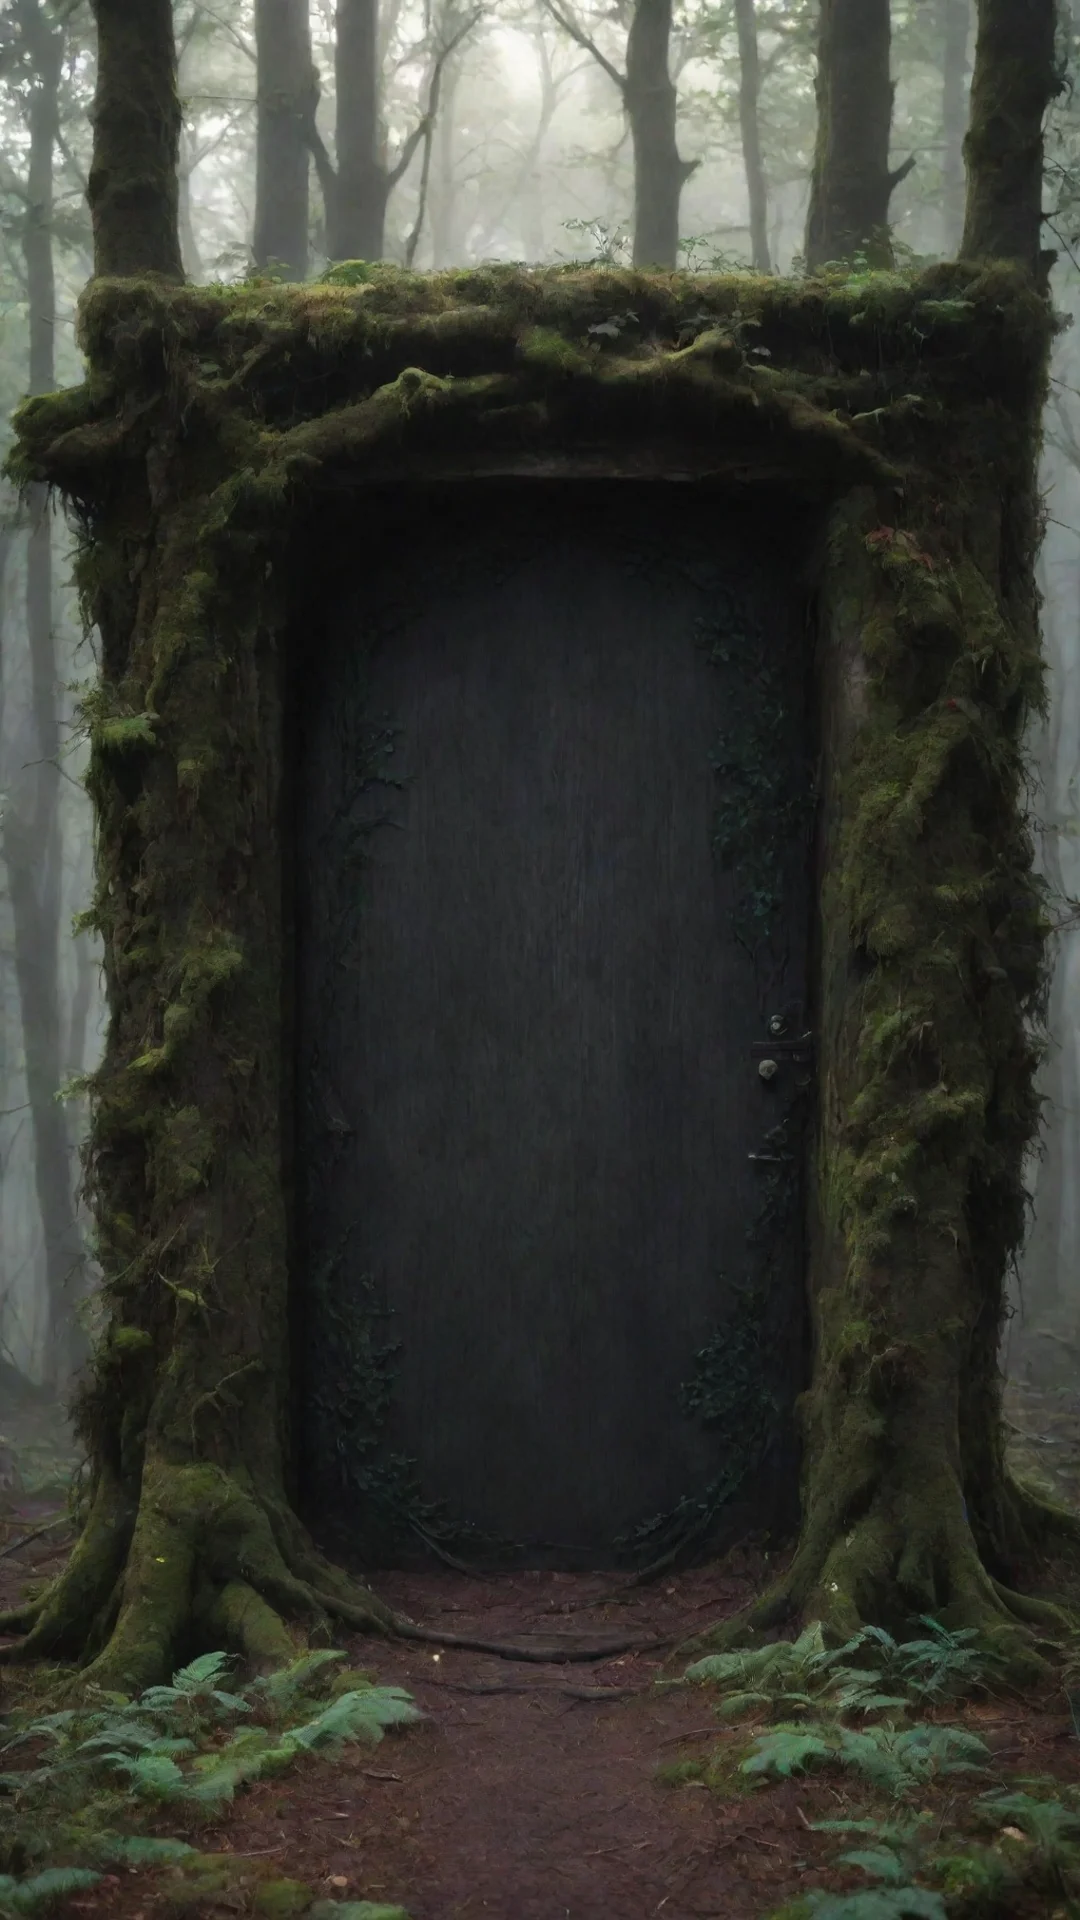 amazing centered in the middle of the forest lays a door to another world a portal to another dimension dark and gloomy forest a awesome portrait 2 tall